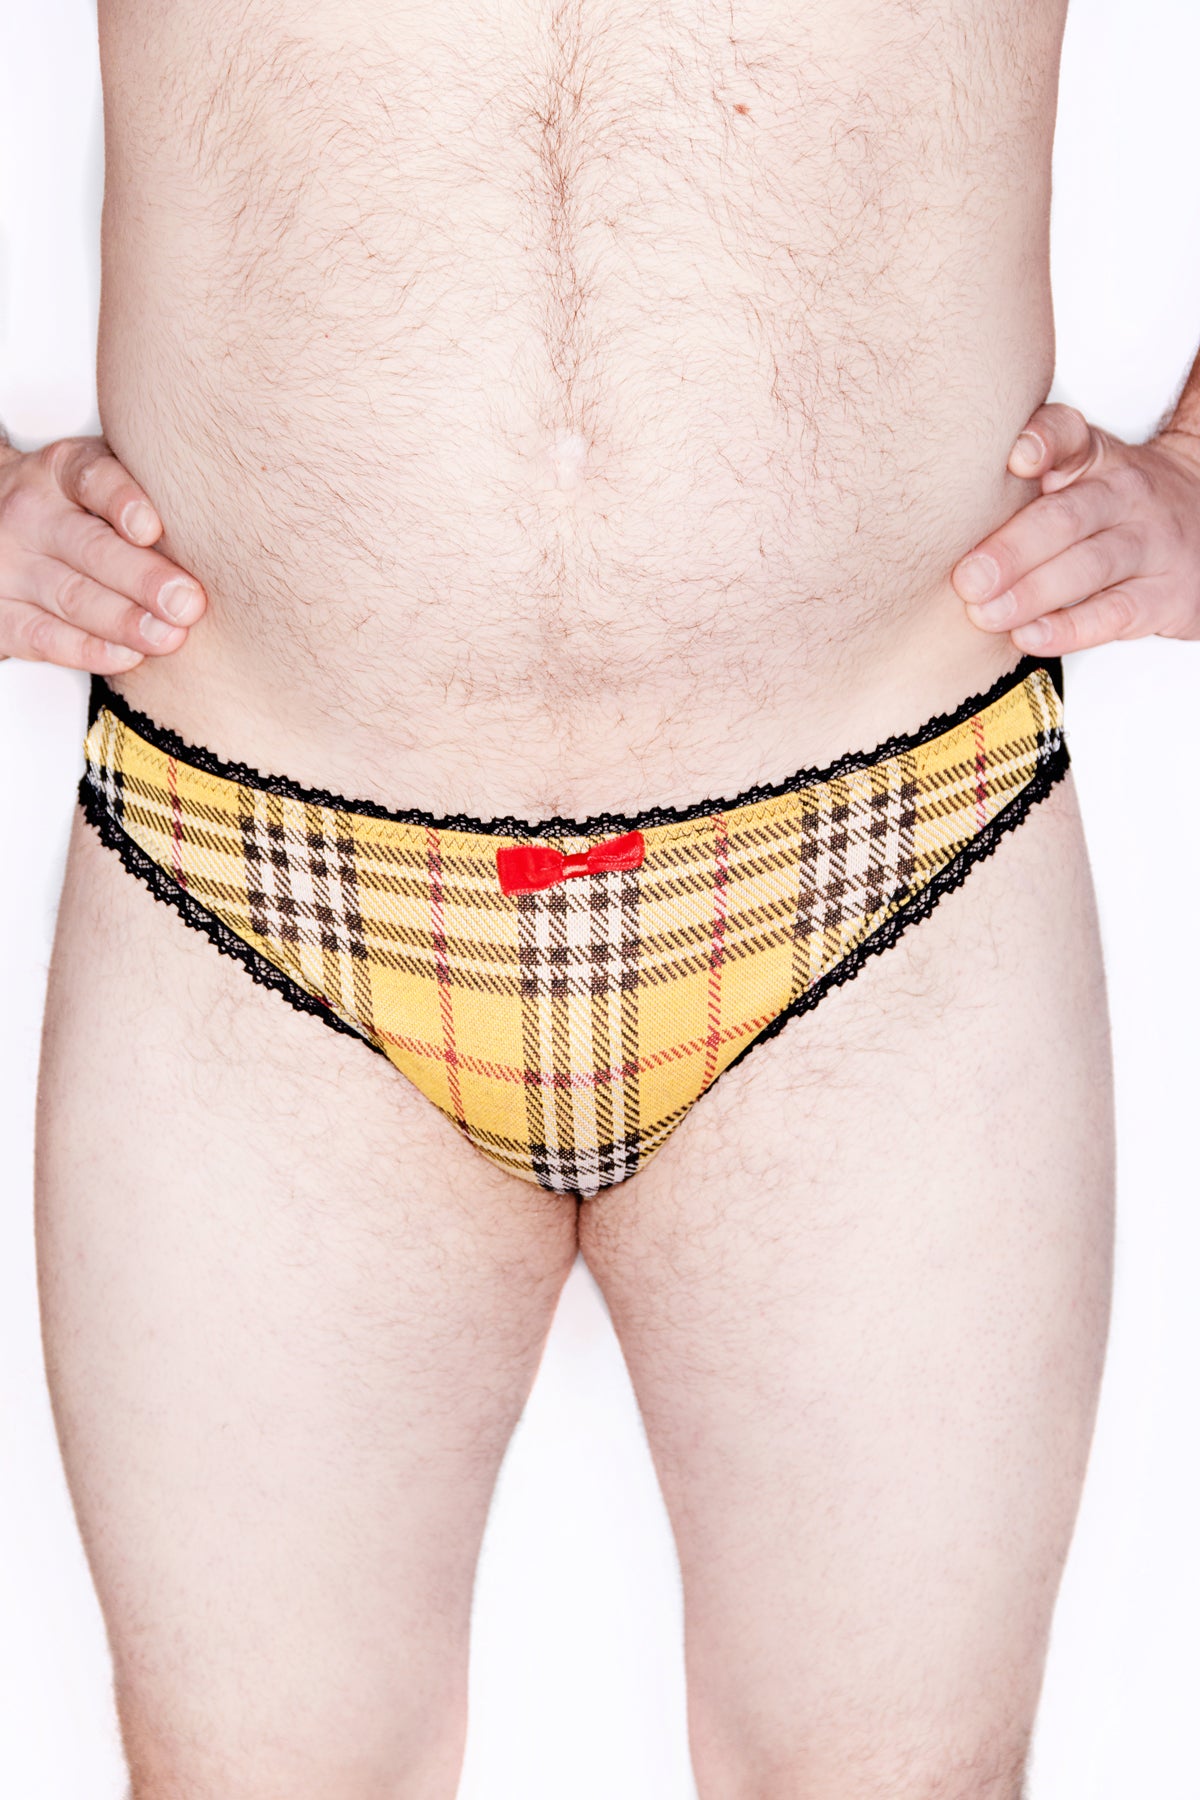  Tartan Brief with rose lace backs Look sharp in this high-quality Mens Blue Plaid Lace back Brief. Crafted from soft ponte plaid and cotton with a luxurious rose lace back for a timeless, sophisticated look. Detailing includes ruffle elastic and velvet center bow. 